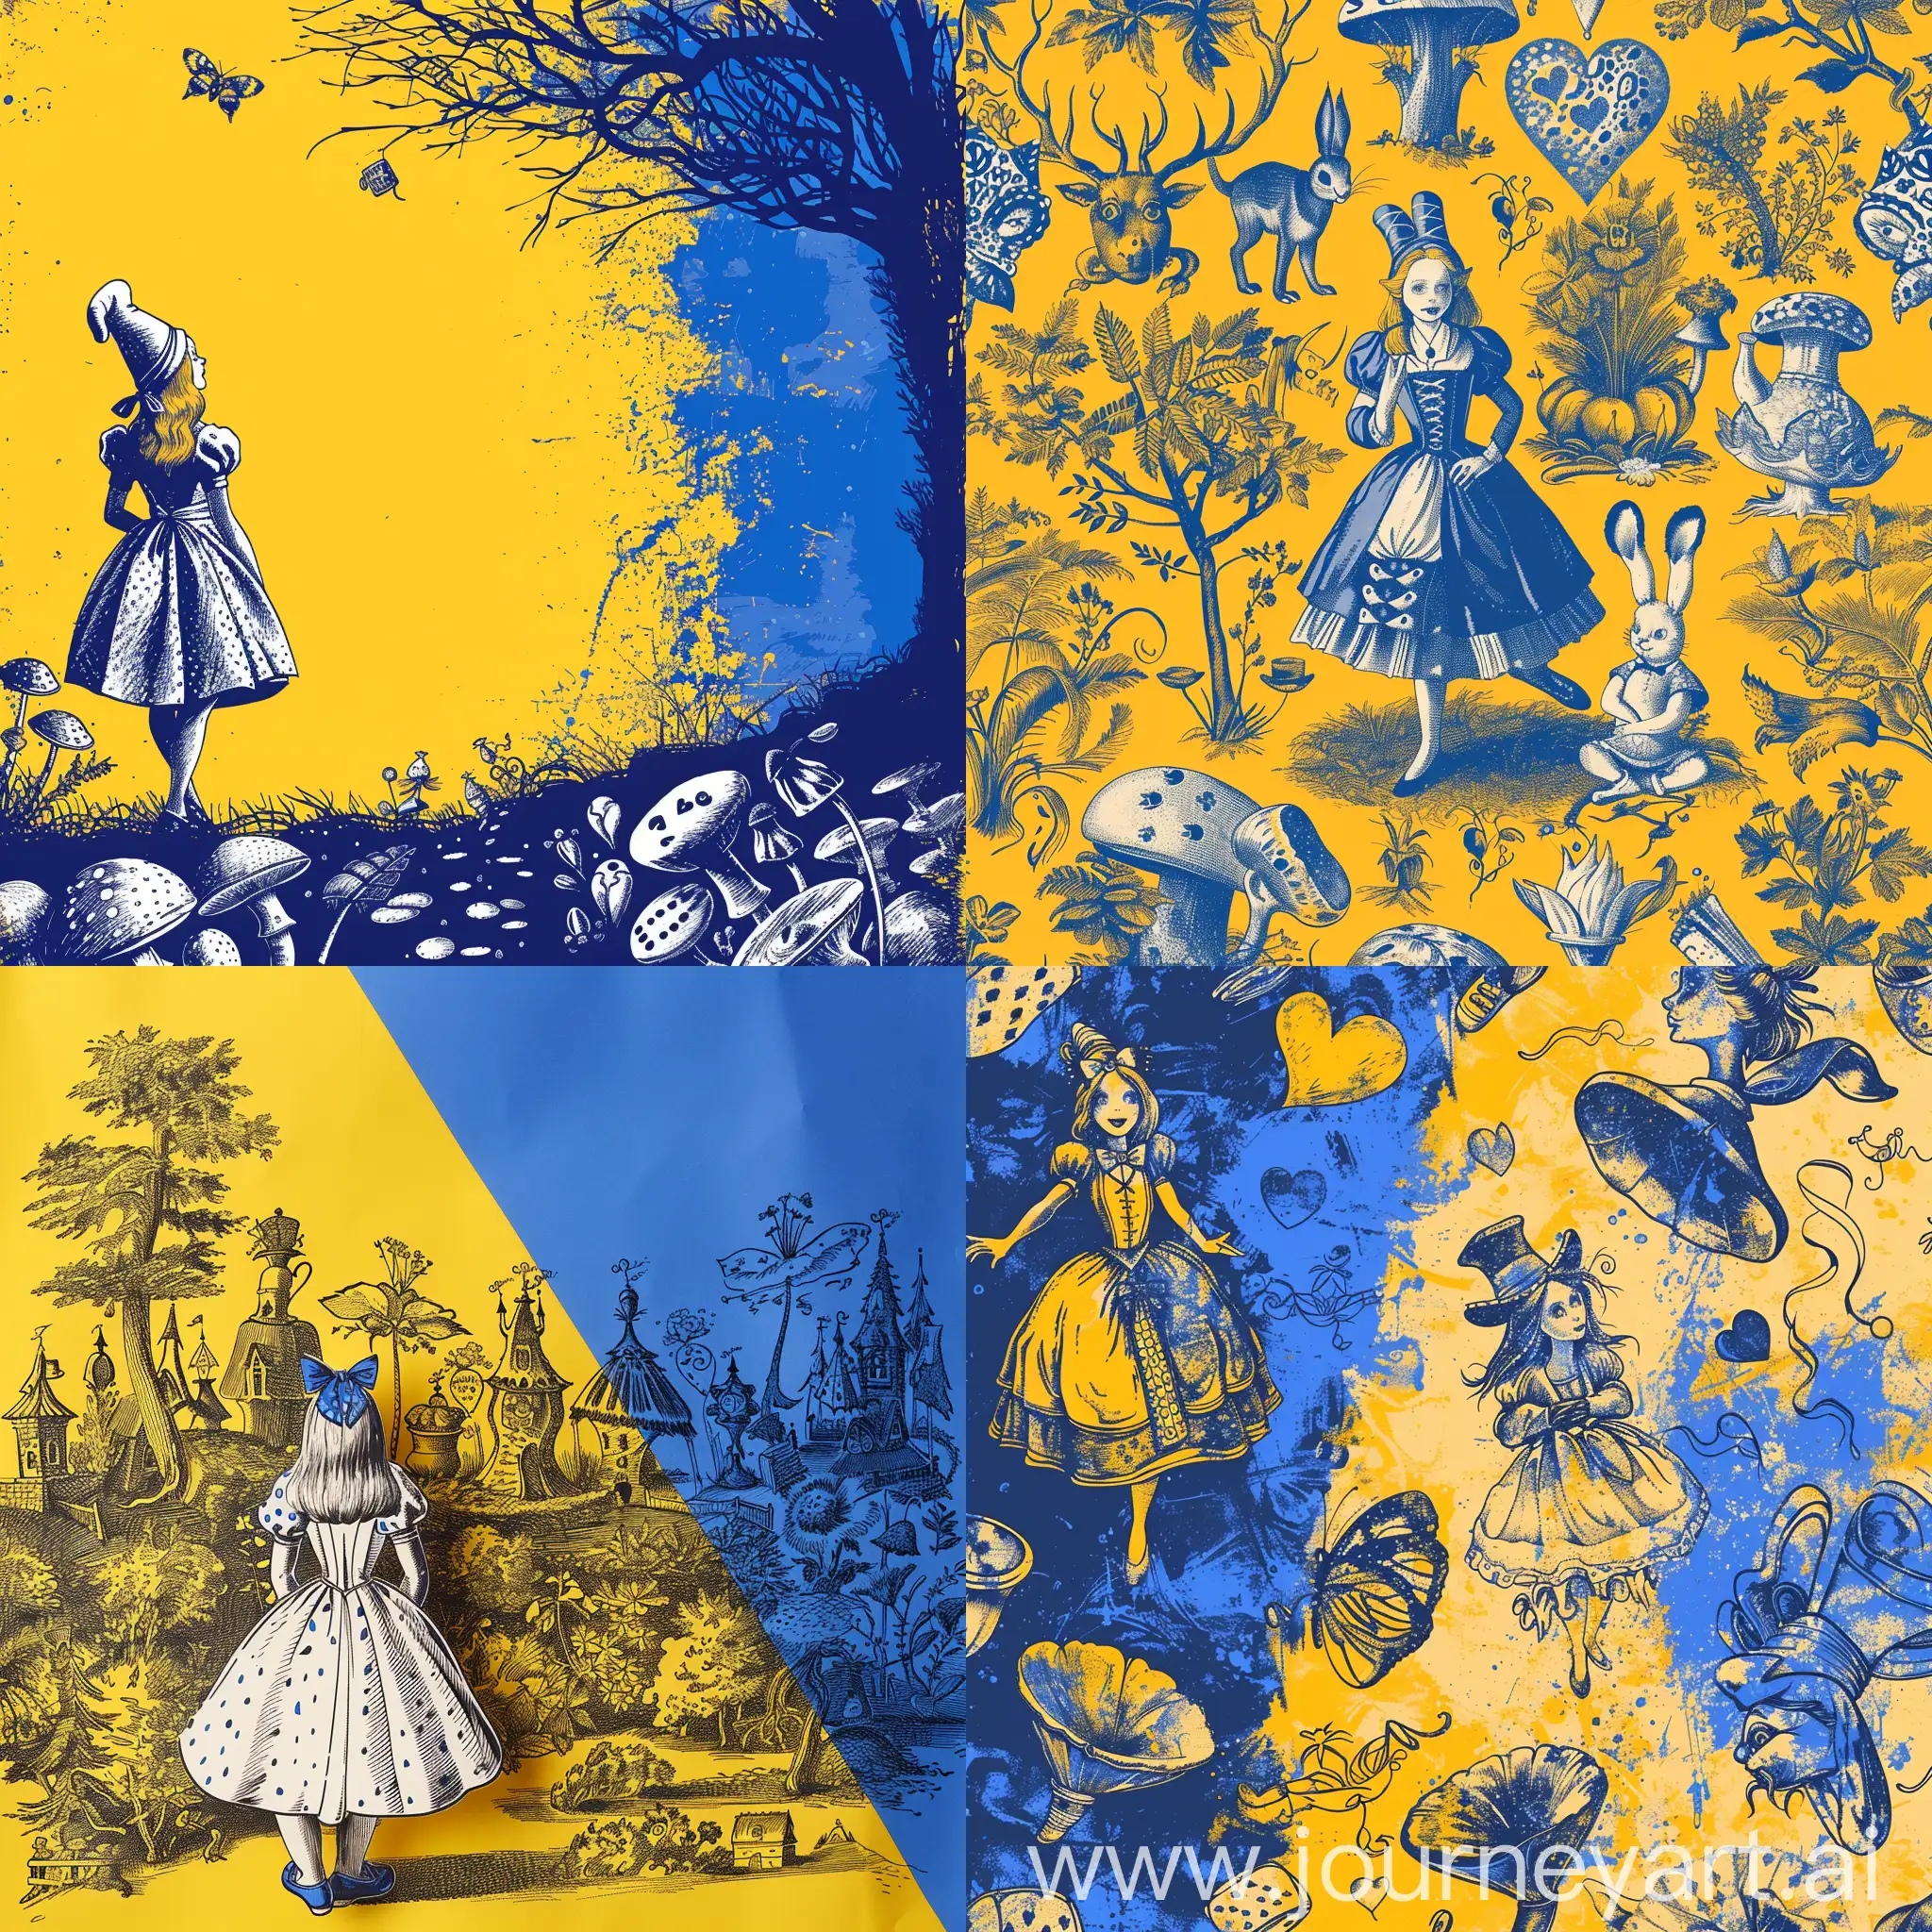 Whimsical-Yellow-and-Blue-Alice-in-Wonderland-Illustrations